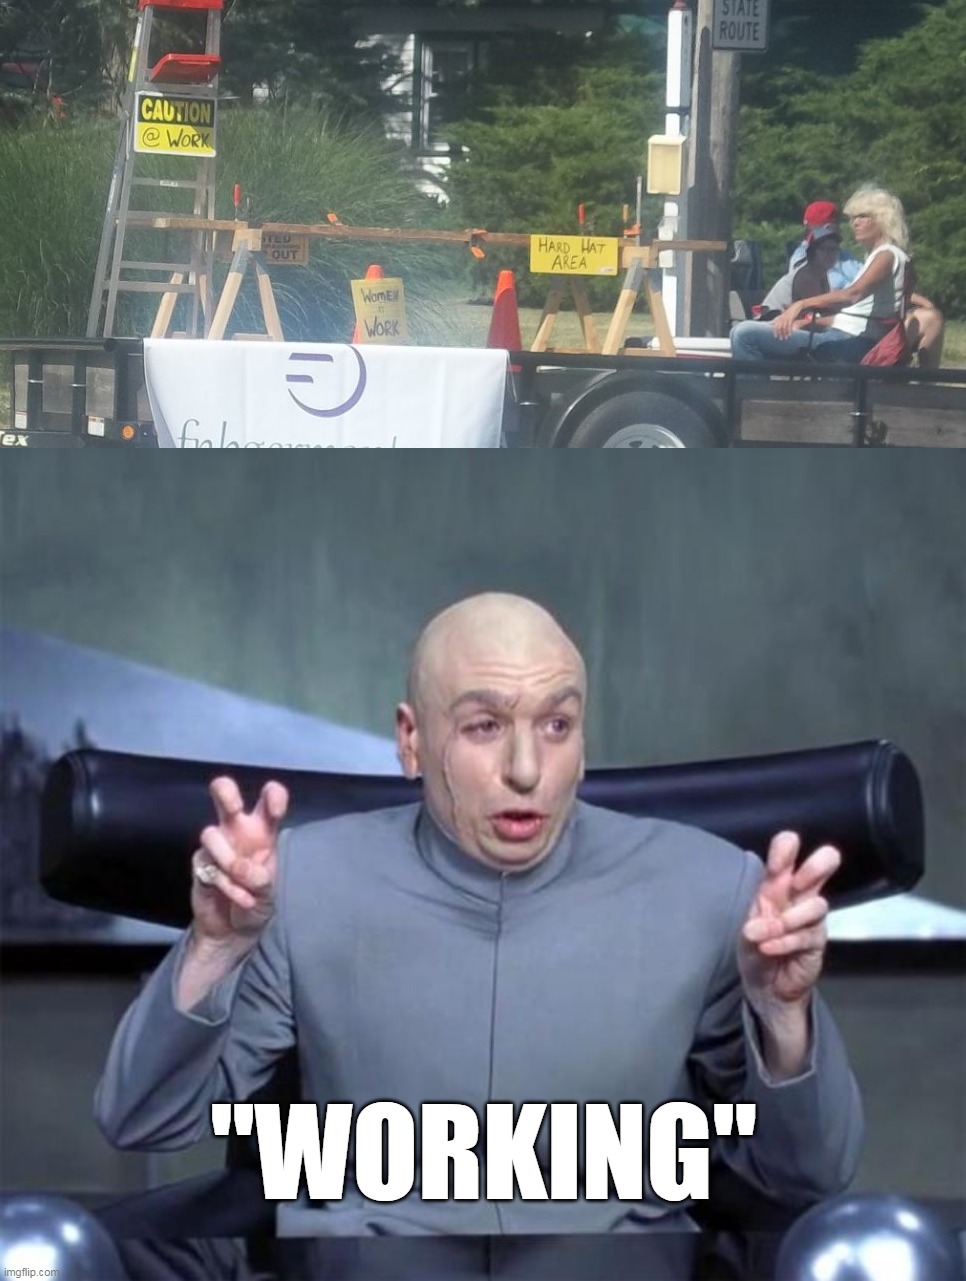 "WORKING" | image tagged in dr evil quotations,meme,memes,humor | made w/ Imgflip meme maker